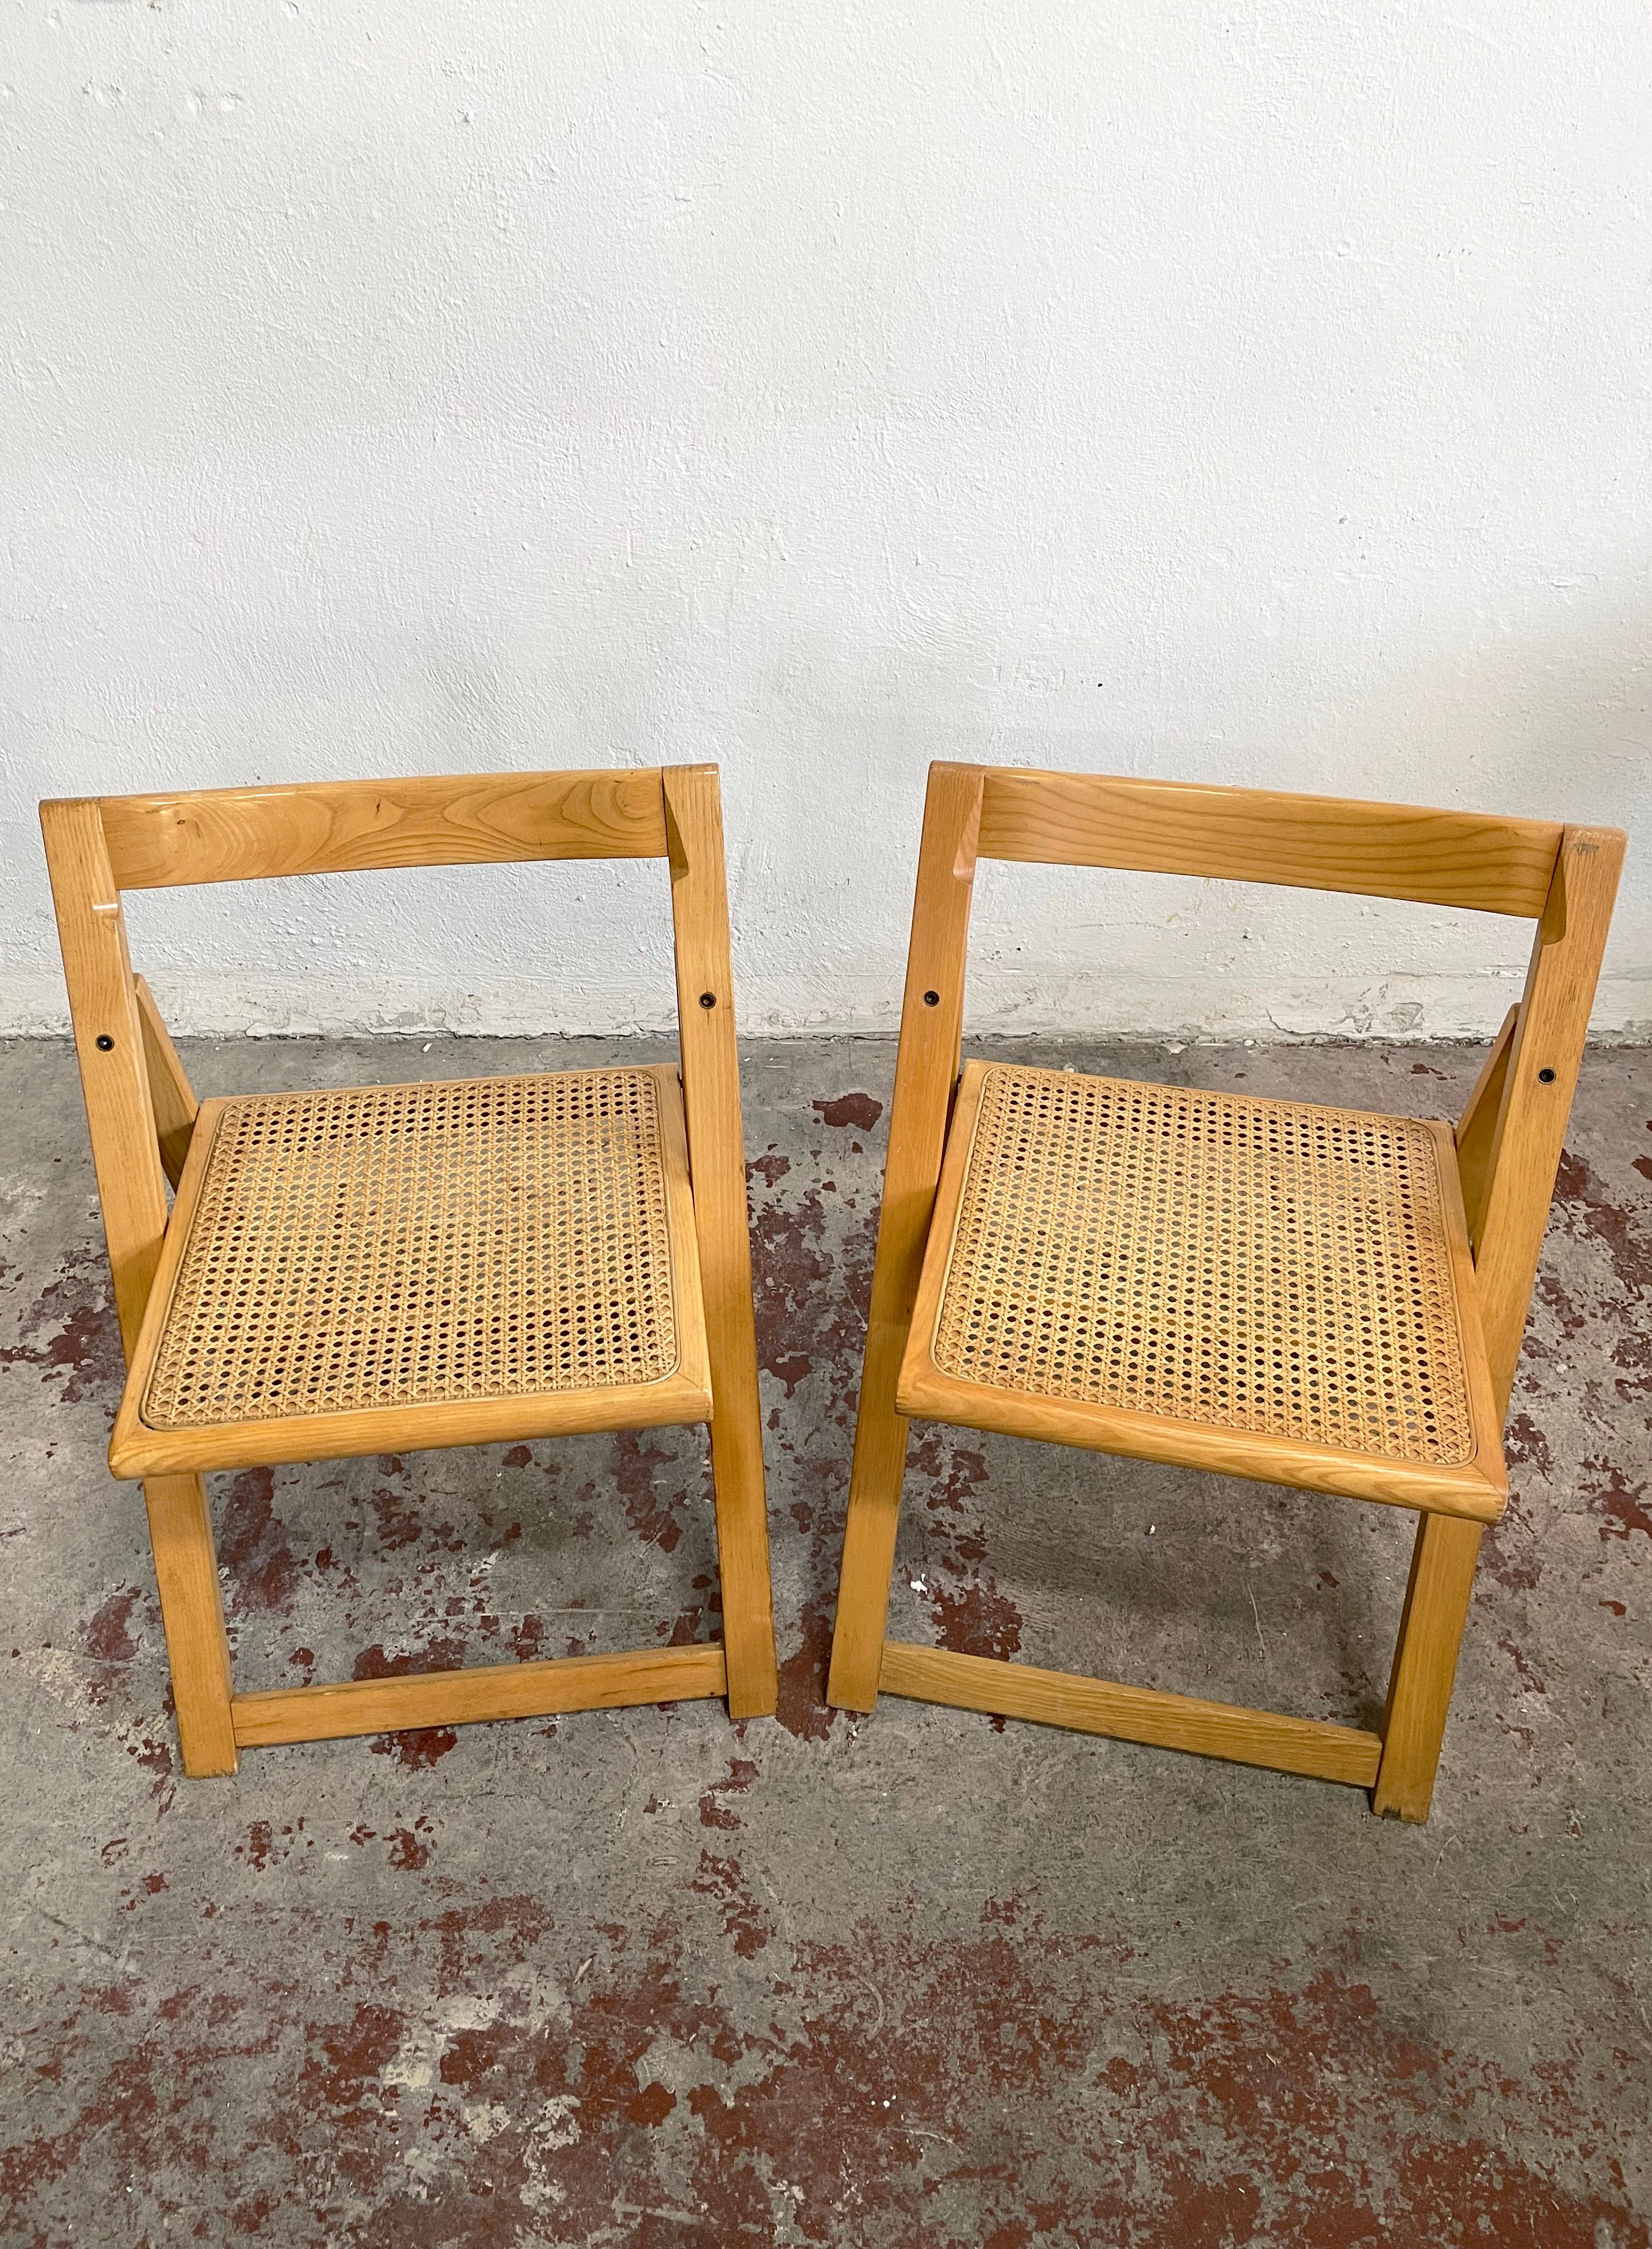 Offered for sale is a set of 2 vintage Italian folding chairs

The chairs are made of solid wood (beech) frame and cane seat

The chairs are in the style of the famous 'Trieste' chair designed by Aldo Jacober and Pierangela d’Aniello

The year